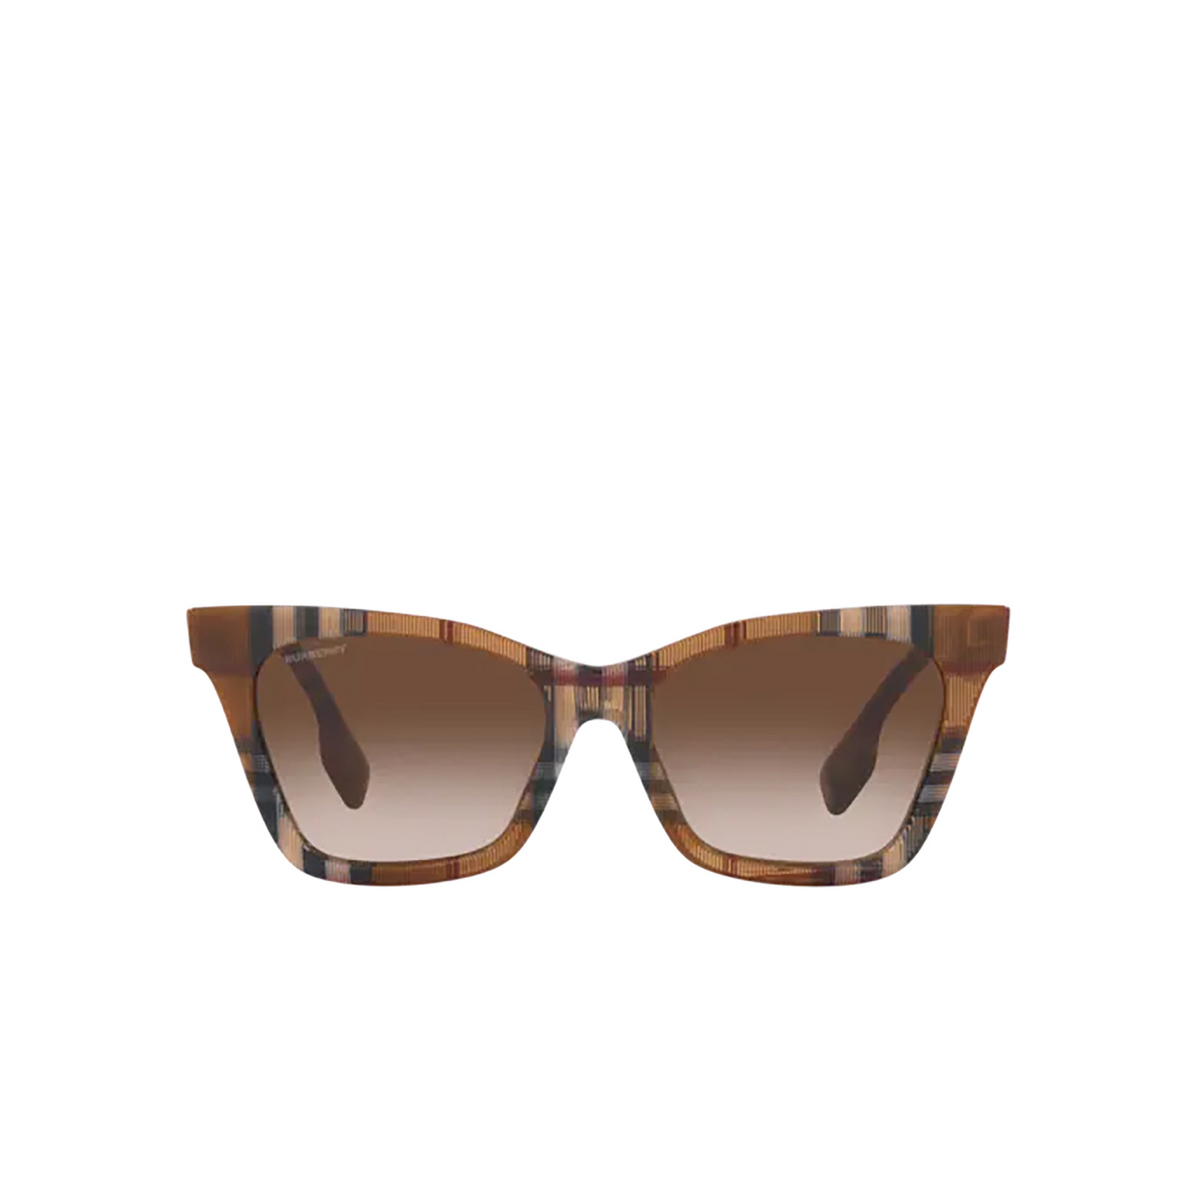 Burberry ELISA Sunglasses 396713 Check Brown - front view